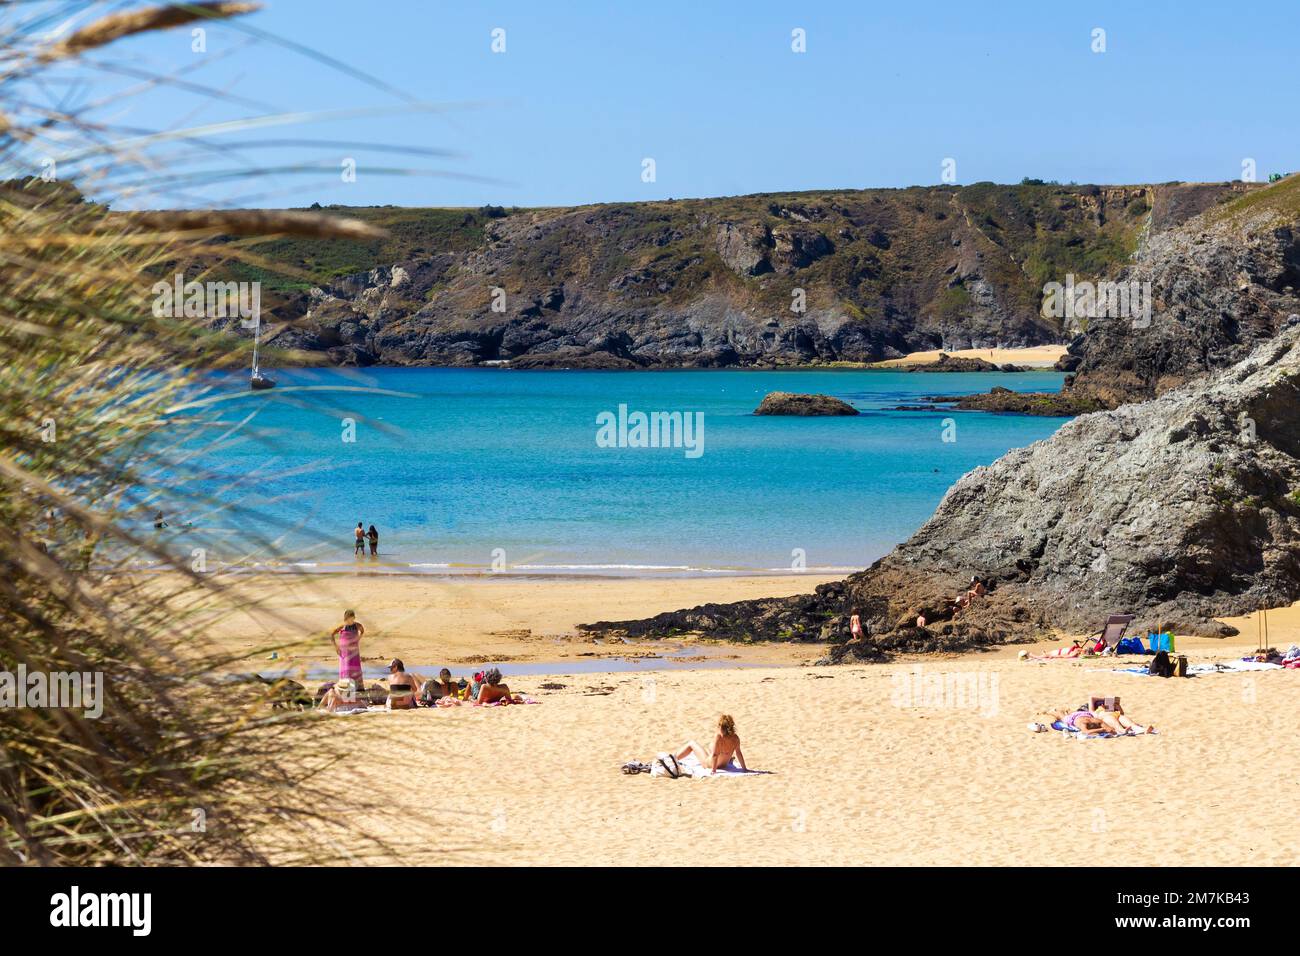 Paradise beach at Belle-Ile, Brittany island, France Stock Photo